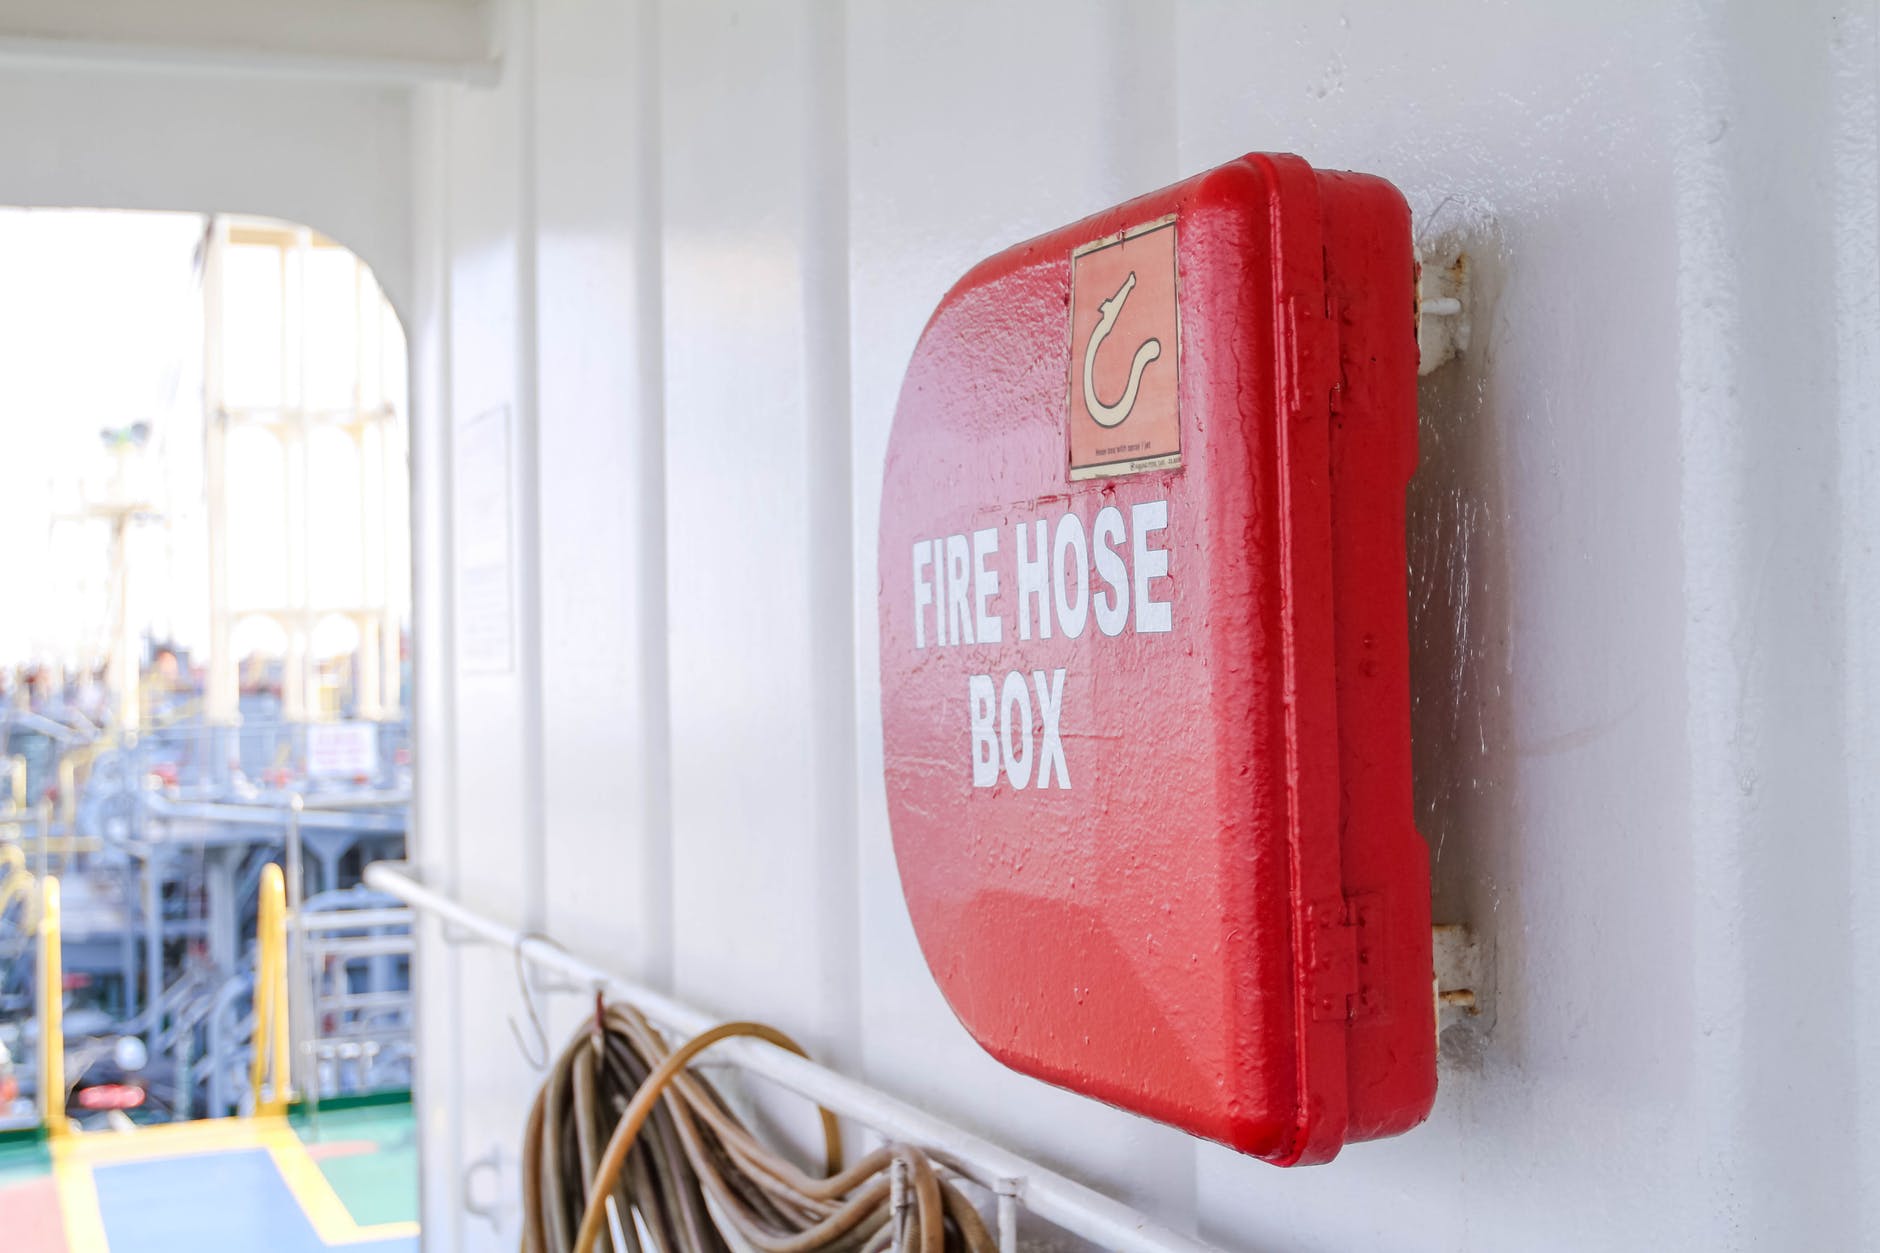 4 Areas You Need to Check to Make Sure Your Office Is Up to Fire Code